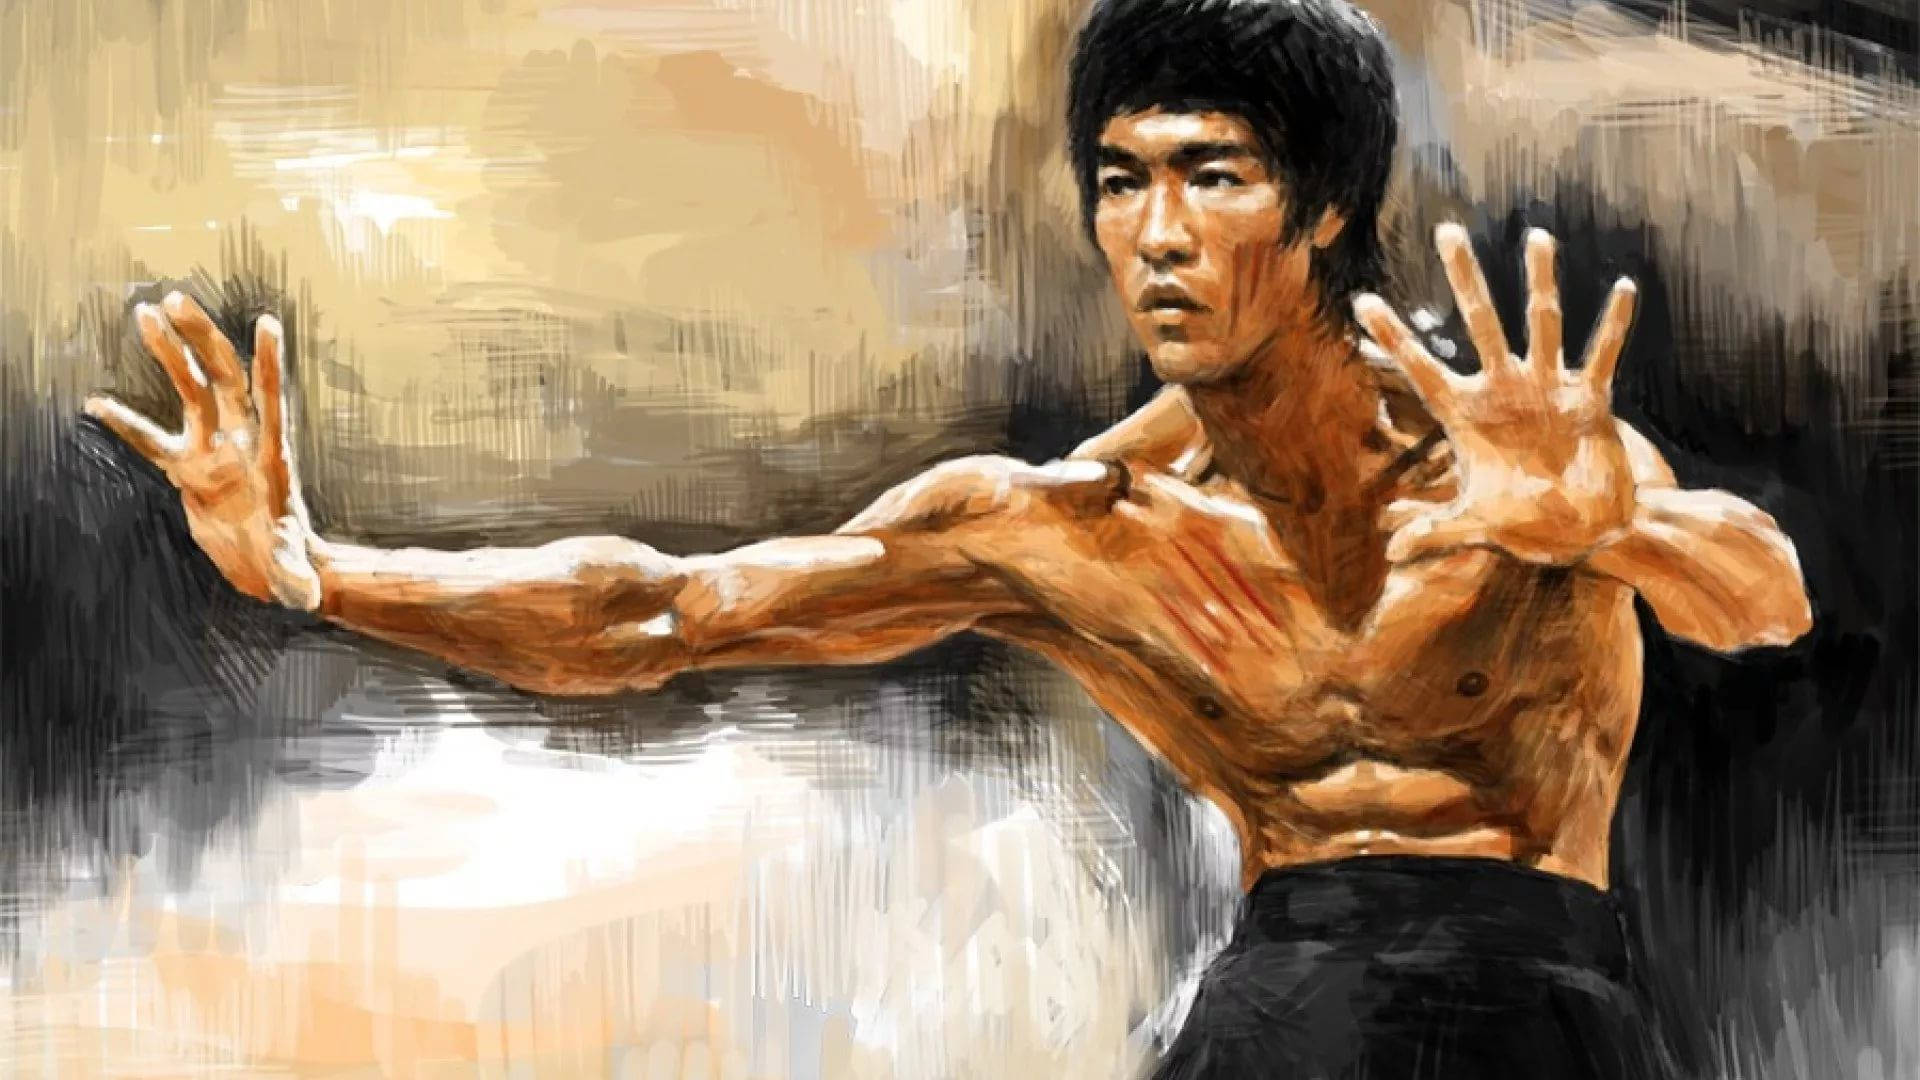 Bruce Lee Hd Wallpaper On Bruce Lee Wallpaper High Quality Resolu Picture